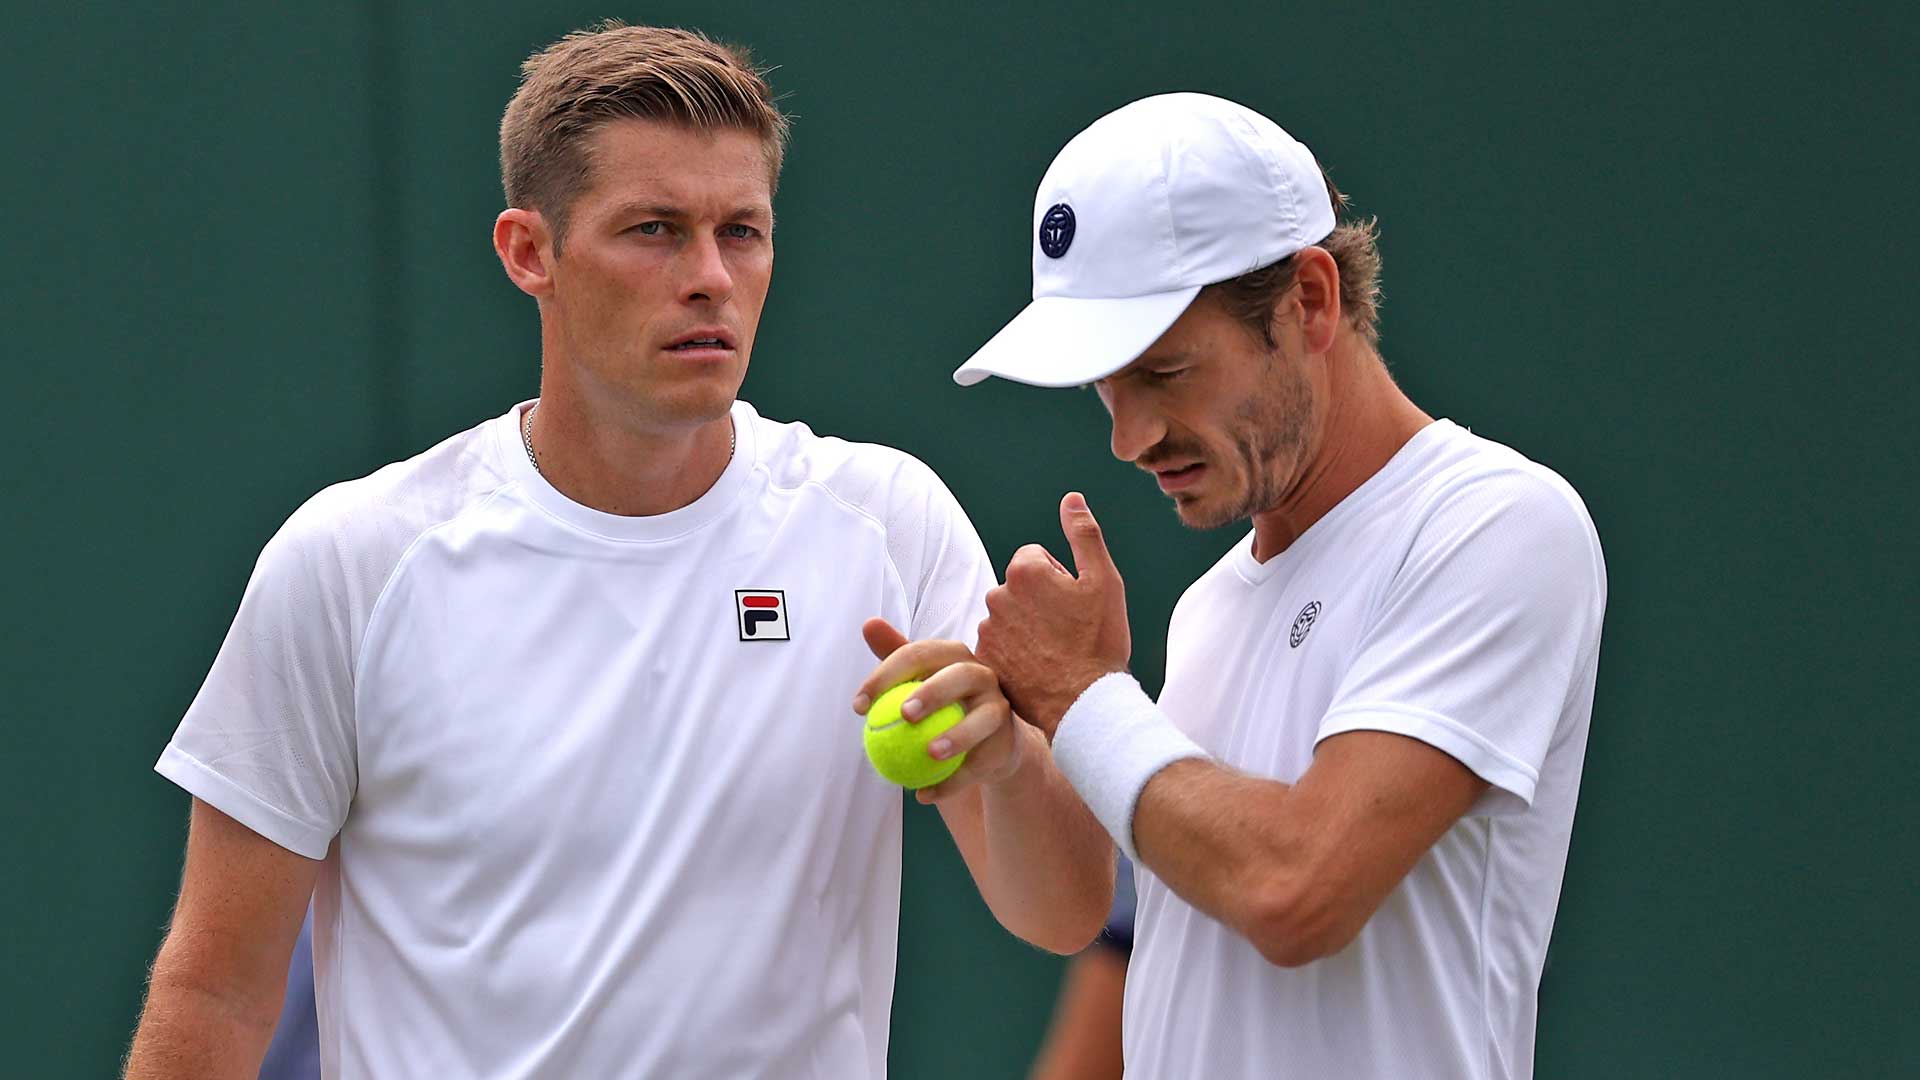 Neal Skupski and Wesley Koolhof are second in the Pepperstone ATP Live Doubles Teams Rankings.